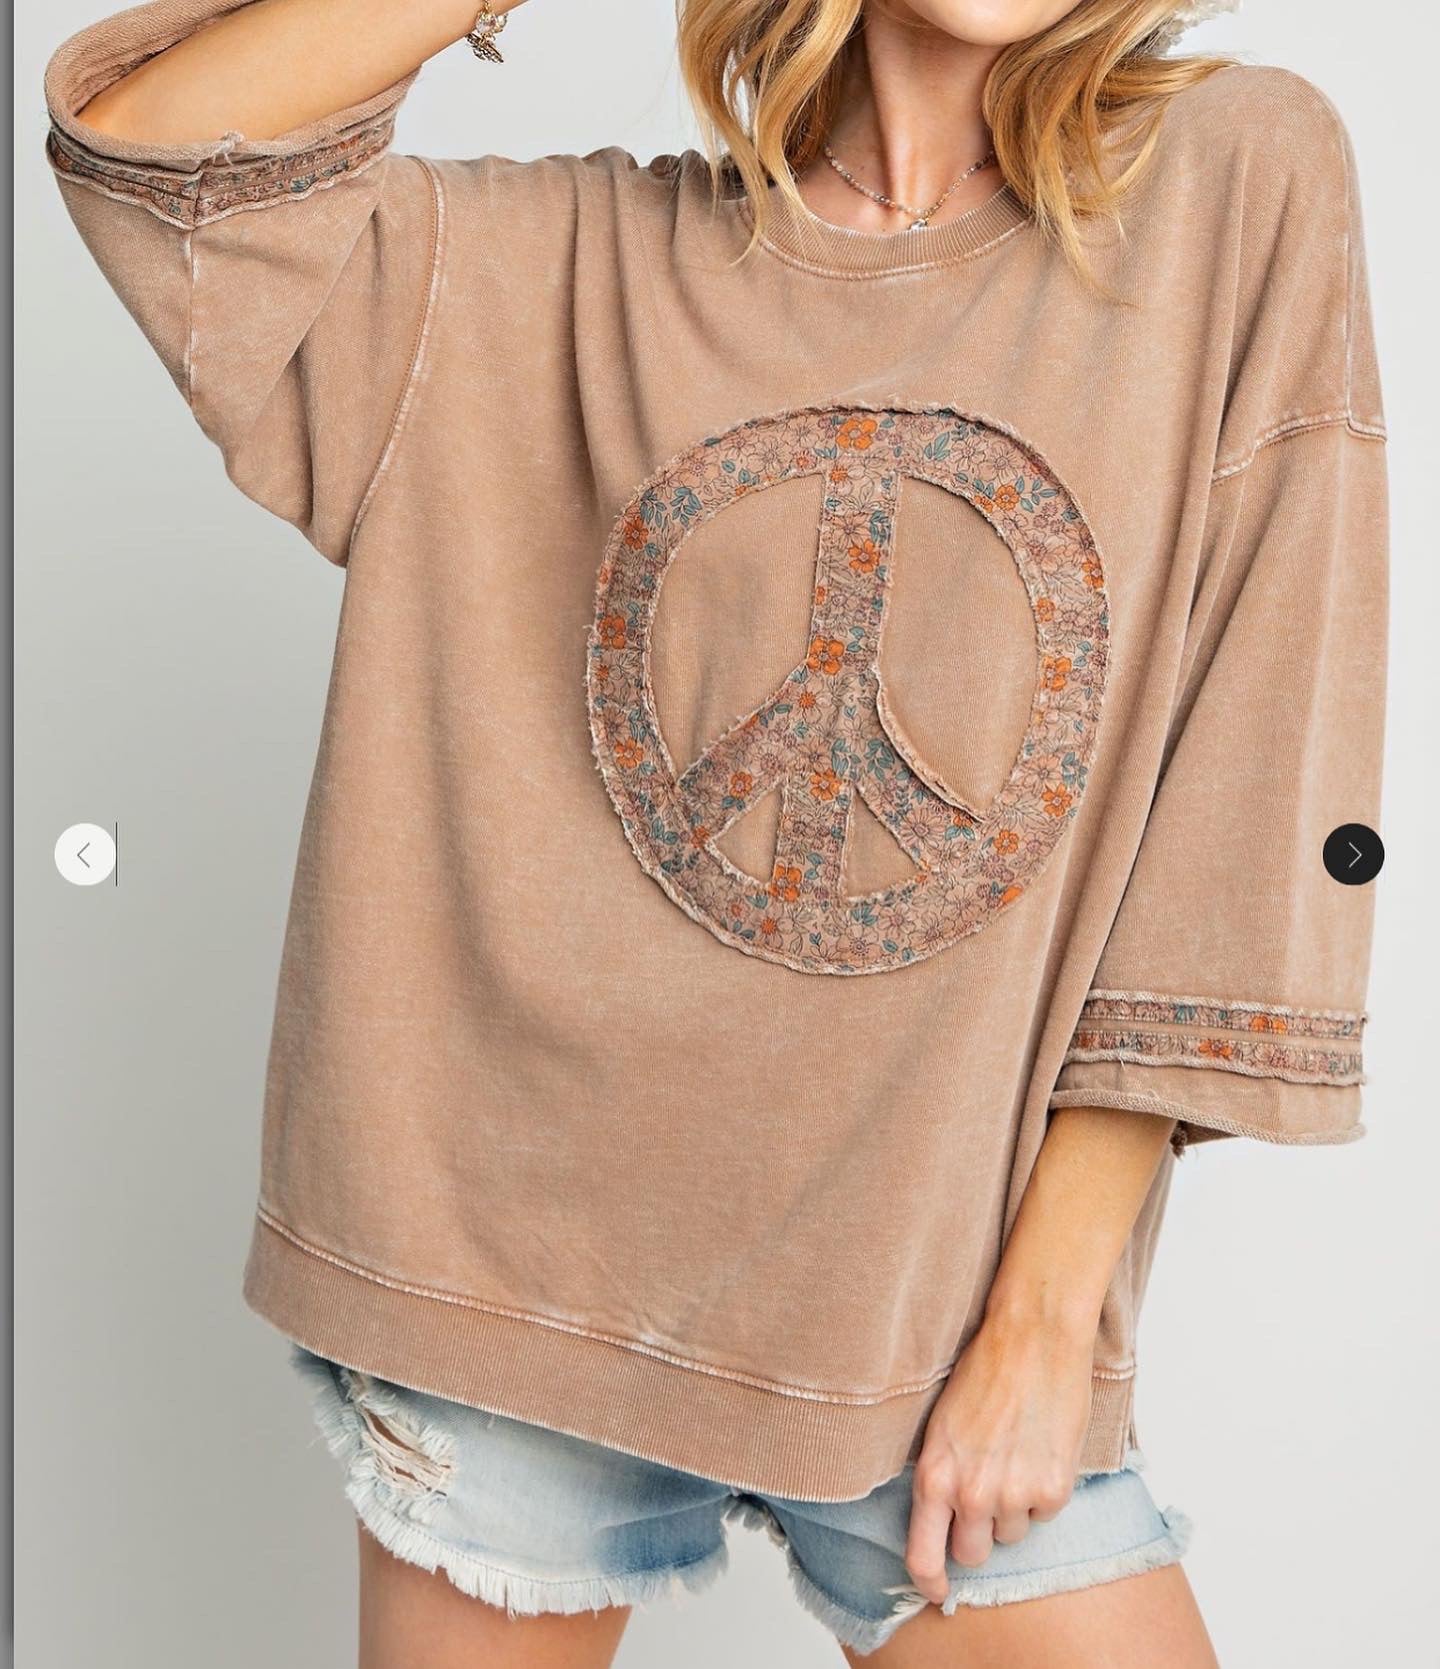 Easel peace sign patched tops